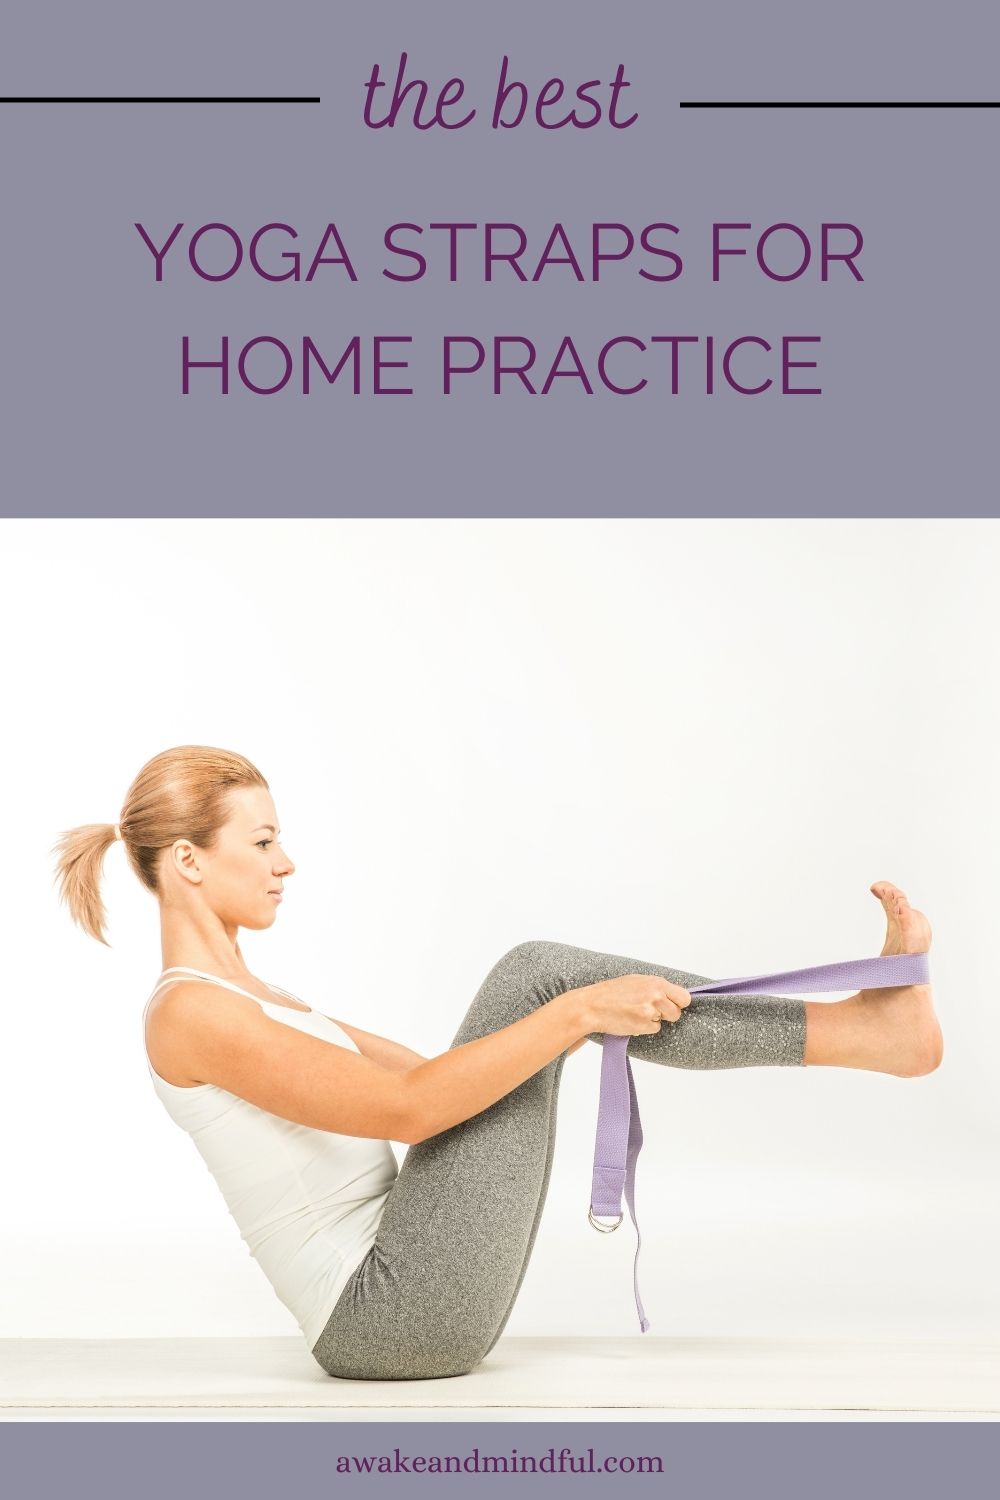 5 Best Yoga Straps for Home Practice